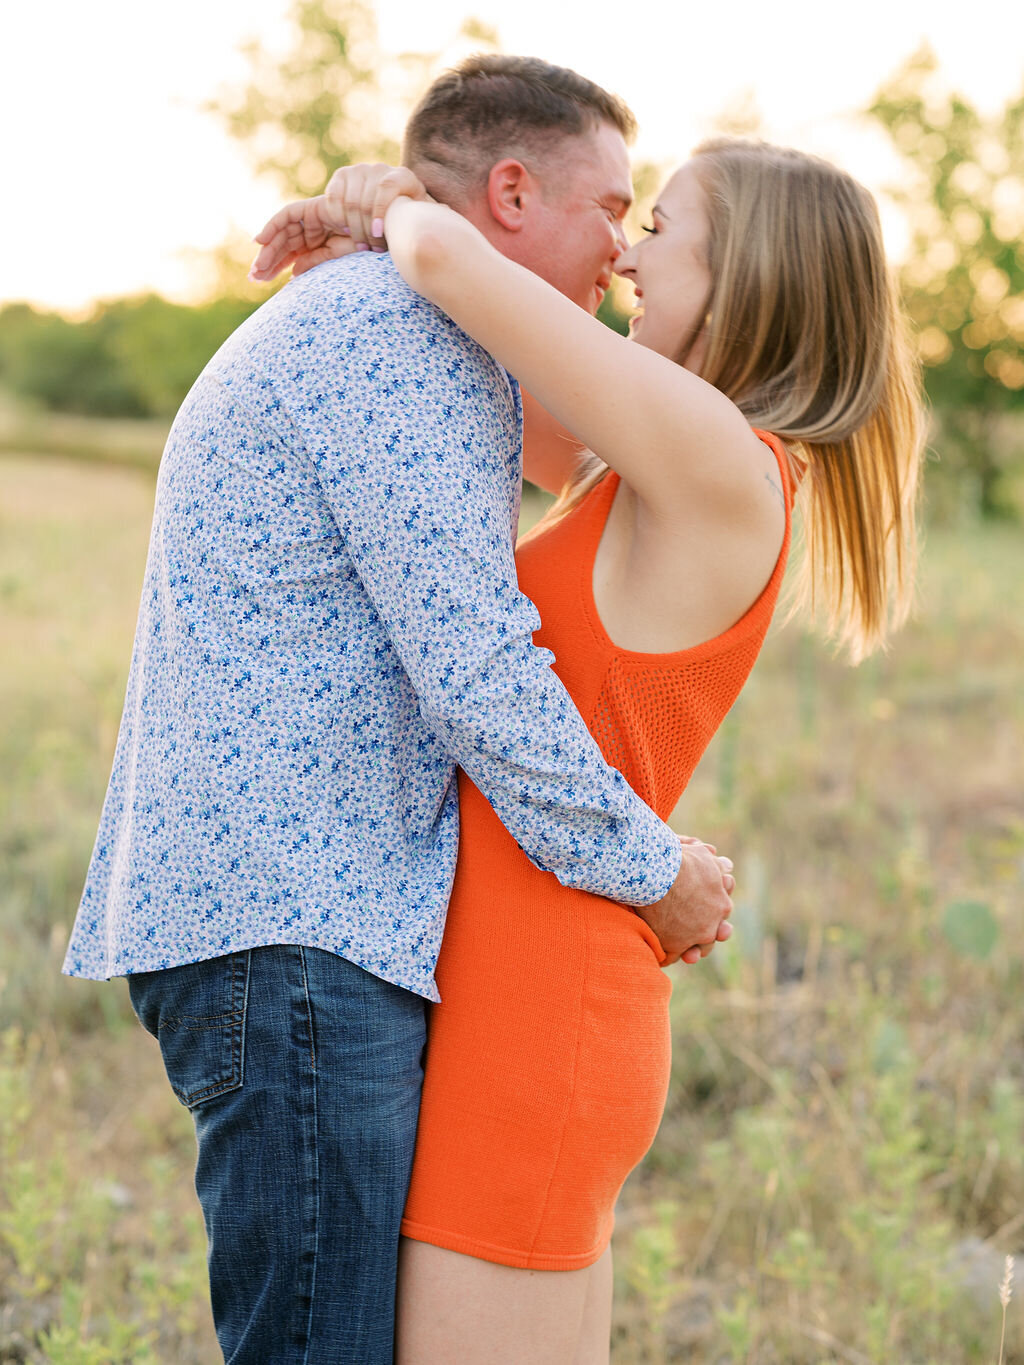 Engagement portraits on family ranch13